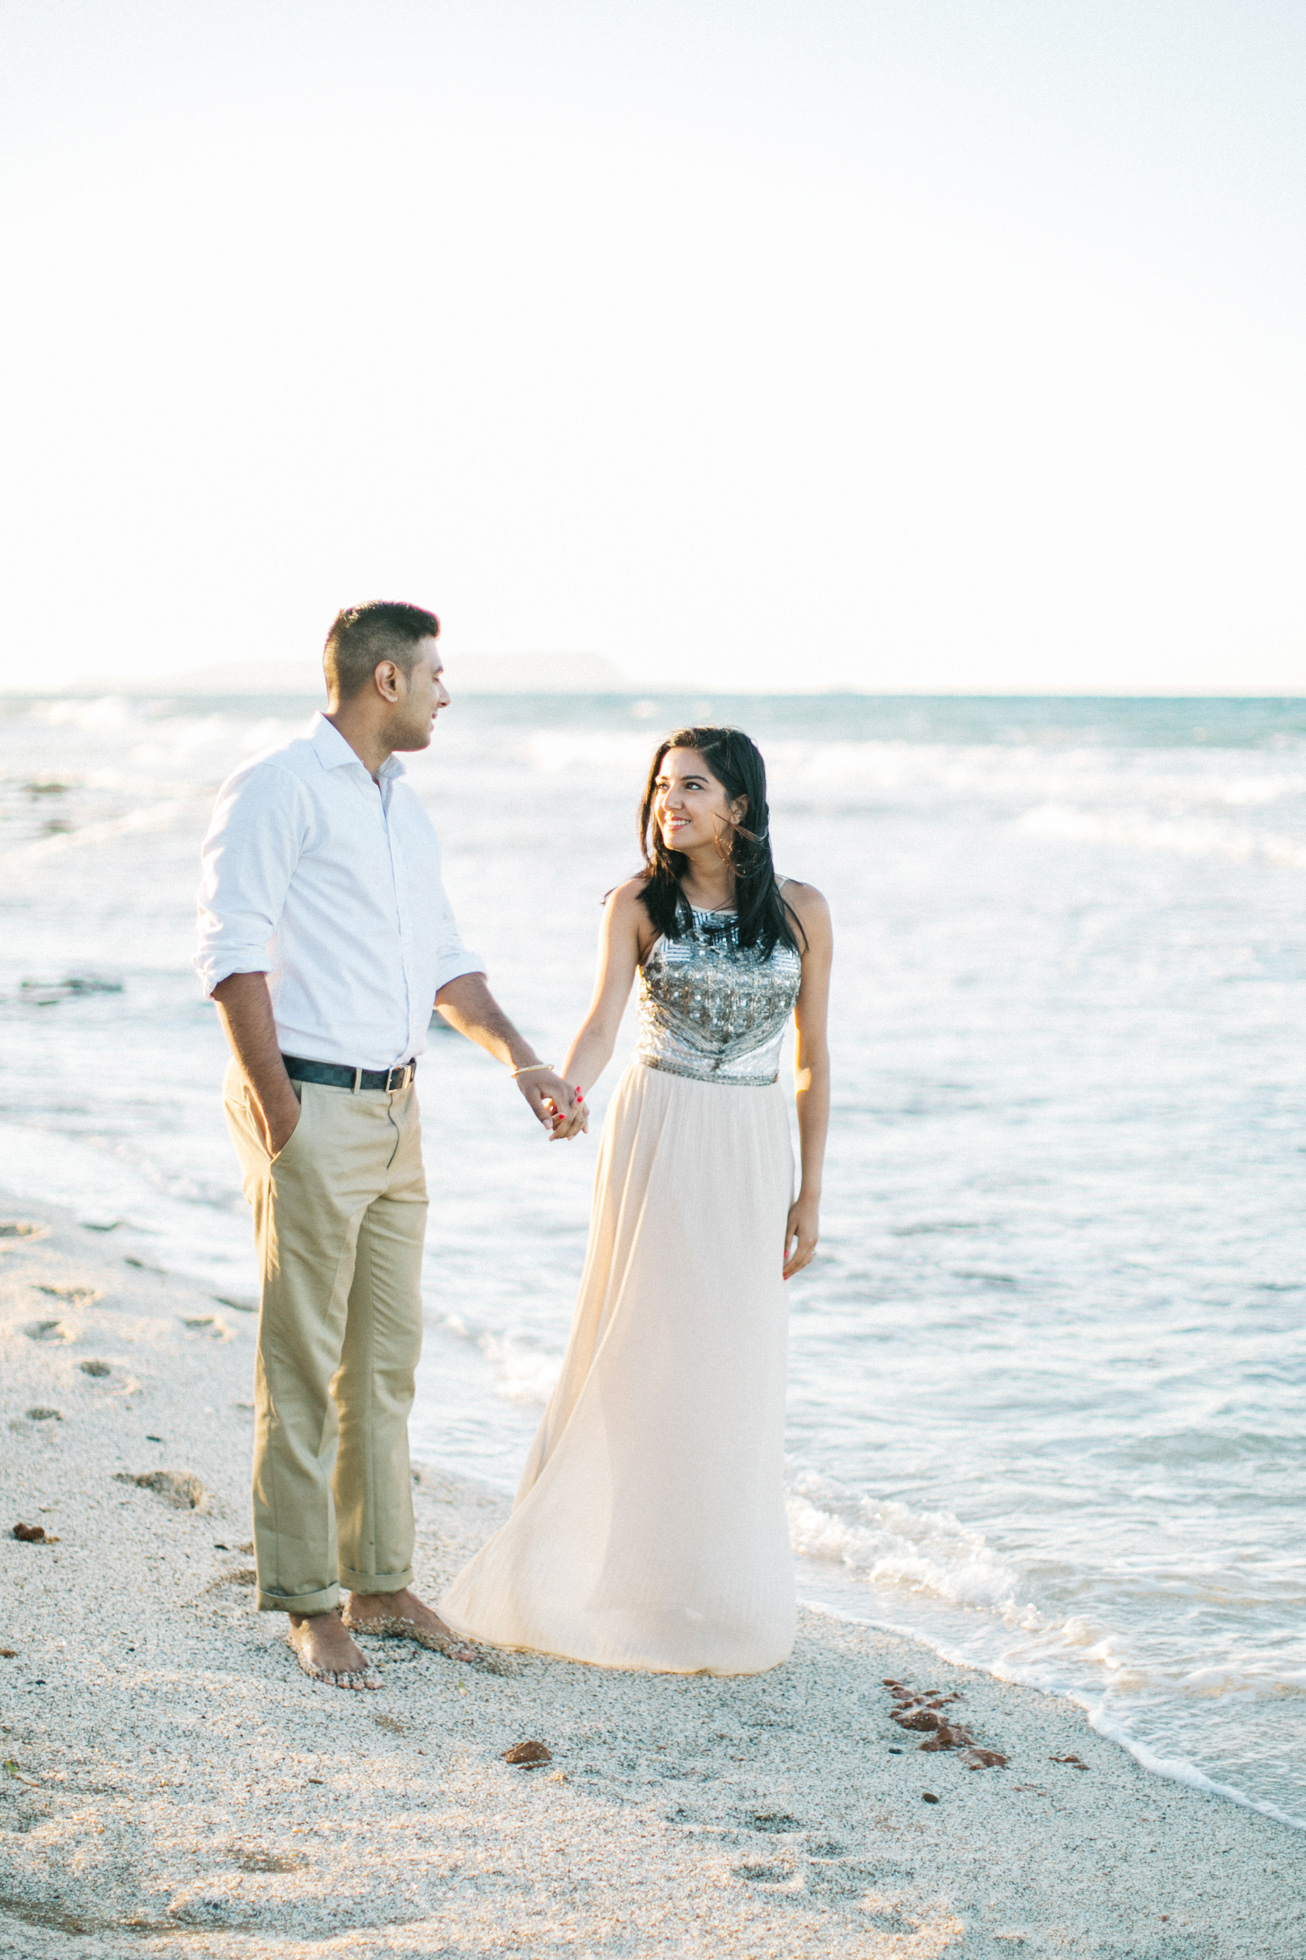 Engaged couple walking along the beach in Crete during their pre wedding engagement photosession at sunset.